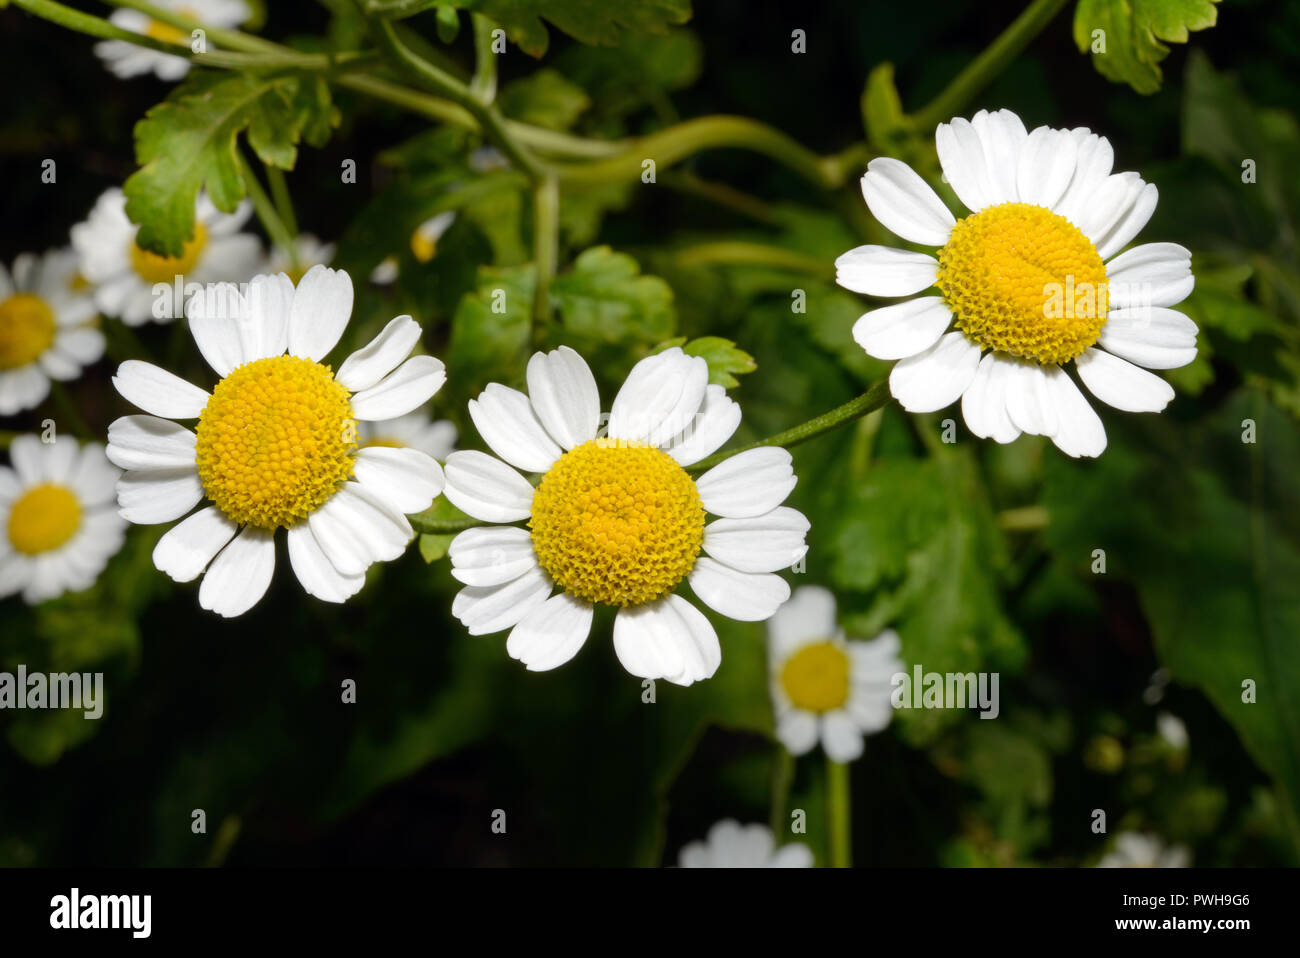 Tanacetum parthenium (feverfew) is a flowering plant found in man-made or disturbed habitats, meadows and fields, native to Eurasia. Stock Photo